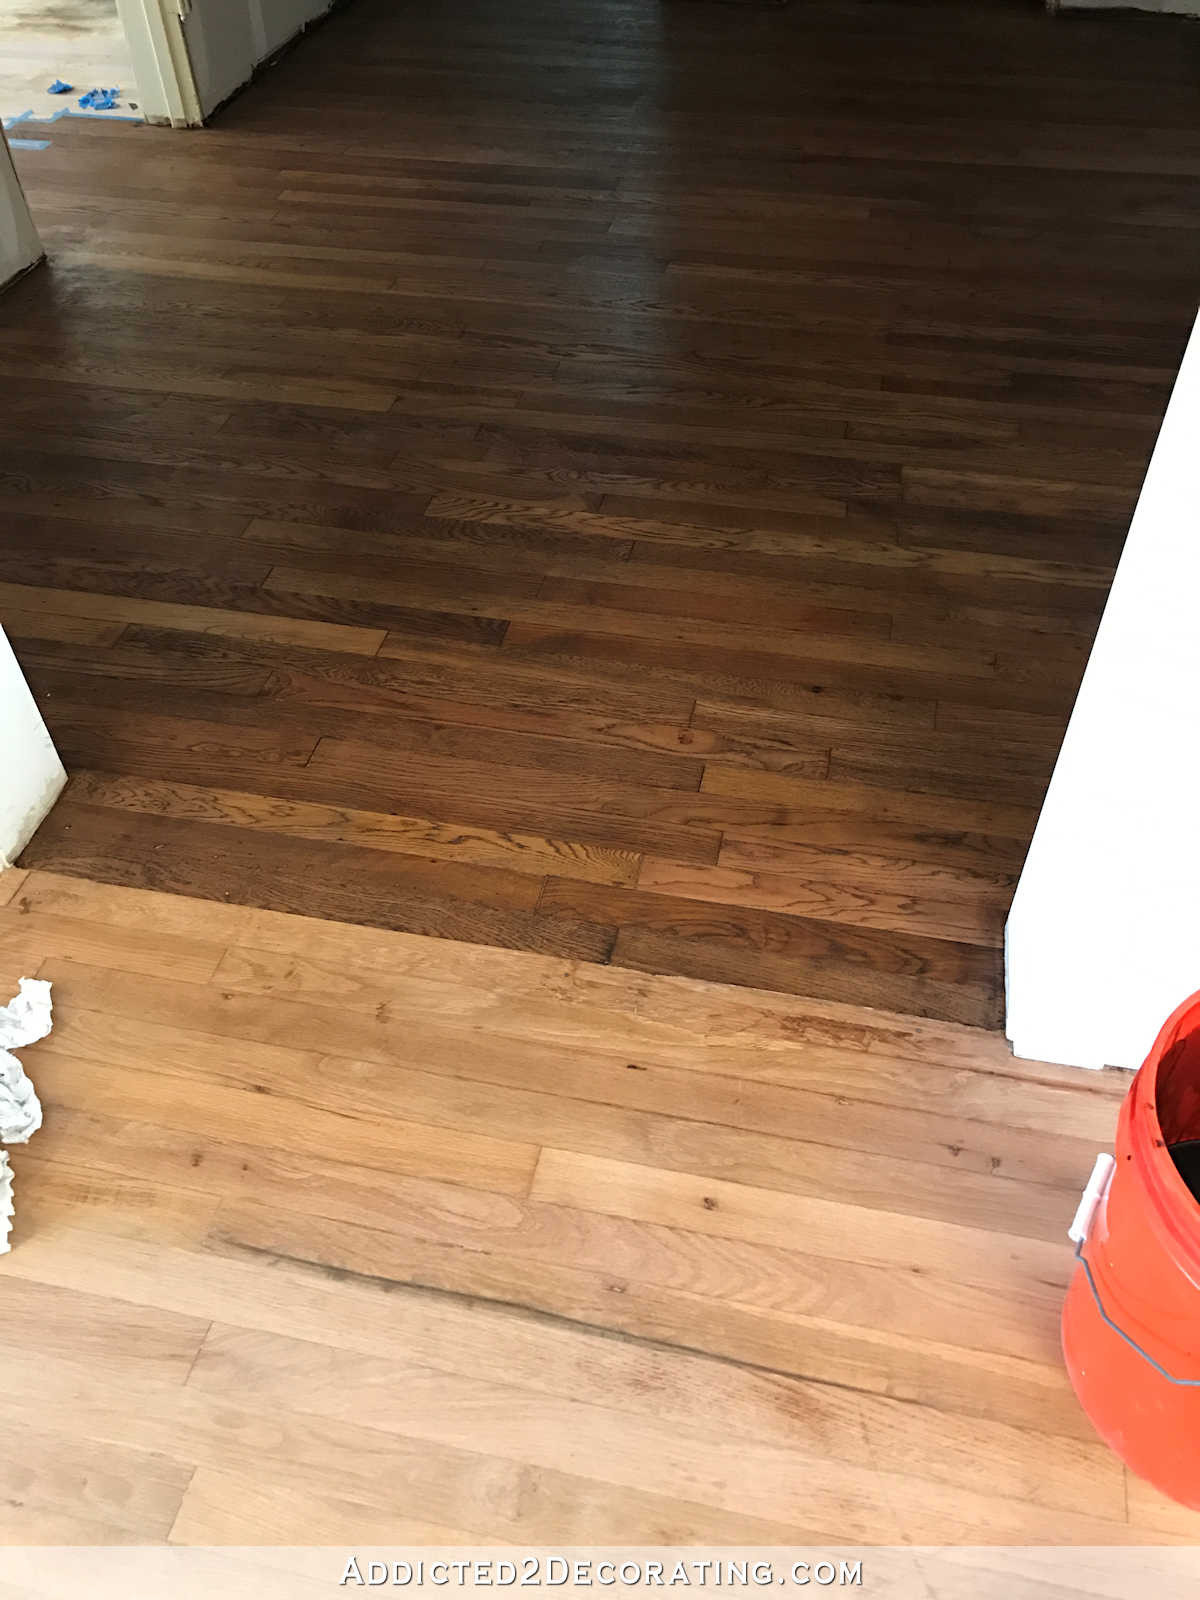 12 Perfect Hardwood Floor Care Scratches 2024 free download hardwood floor care scratches of adventures in staining my red oak hardwood floors products process throughout staining red oak hardwood floors 2 tape off one section at a time for